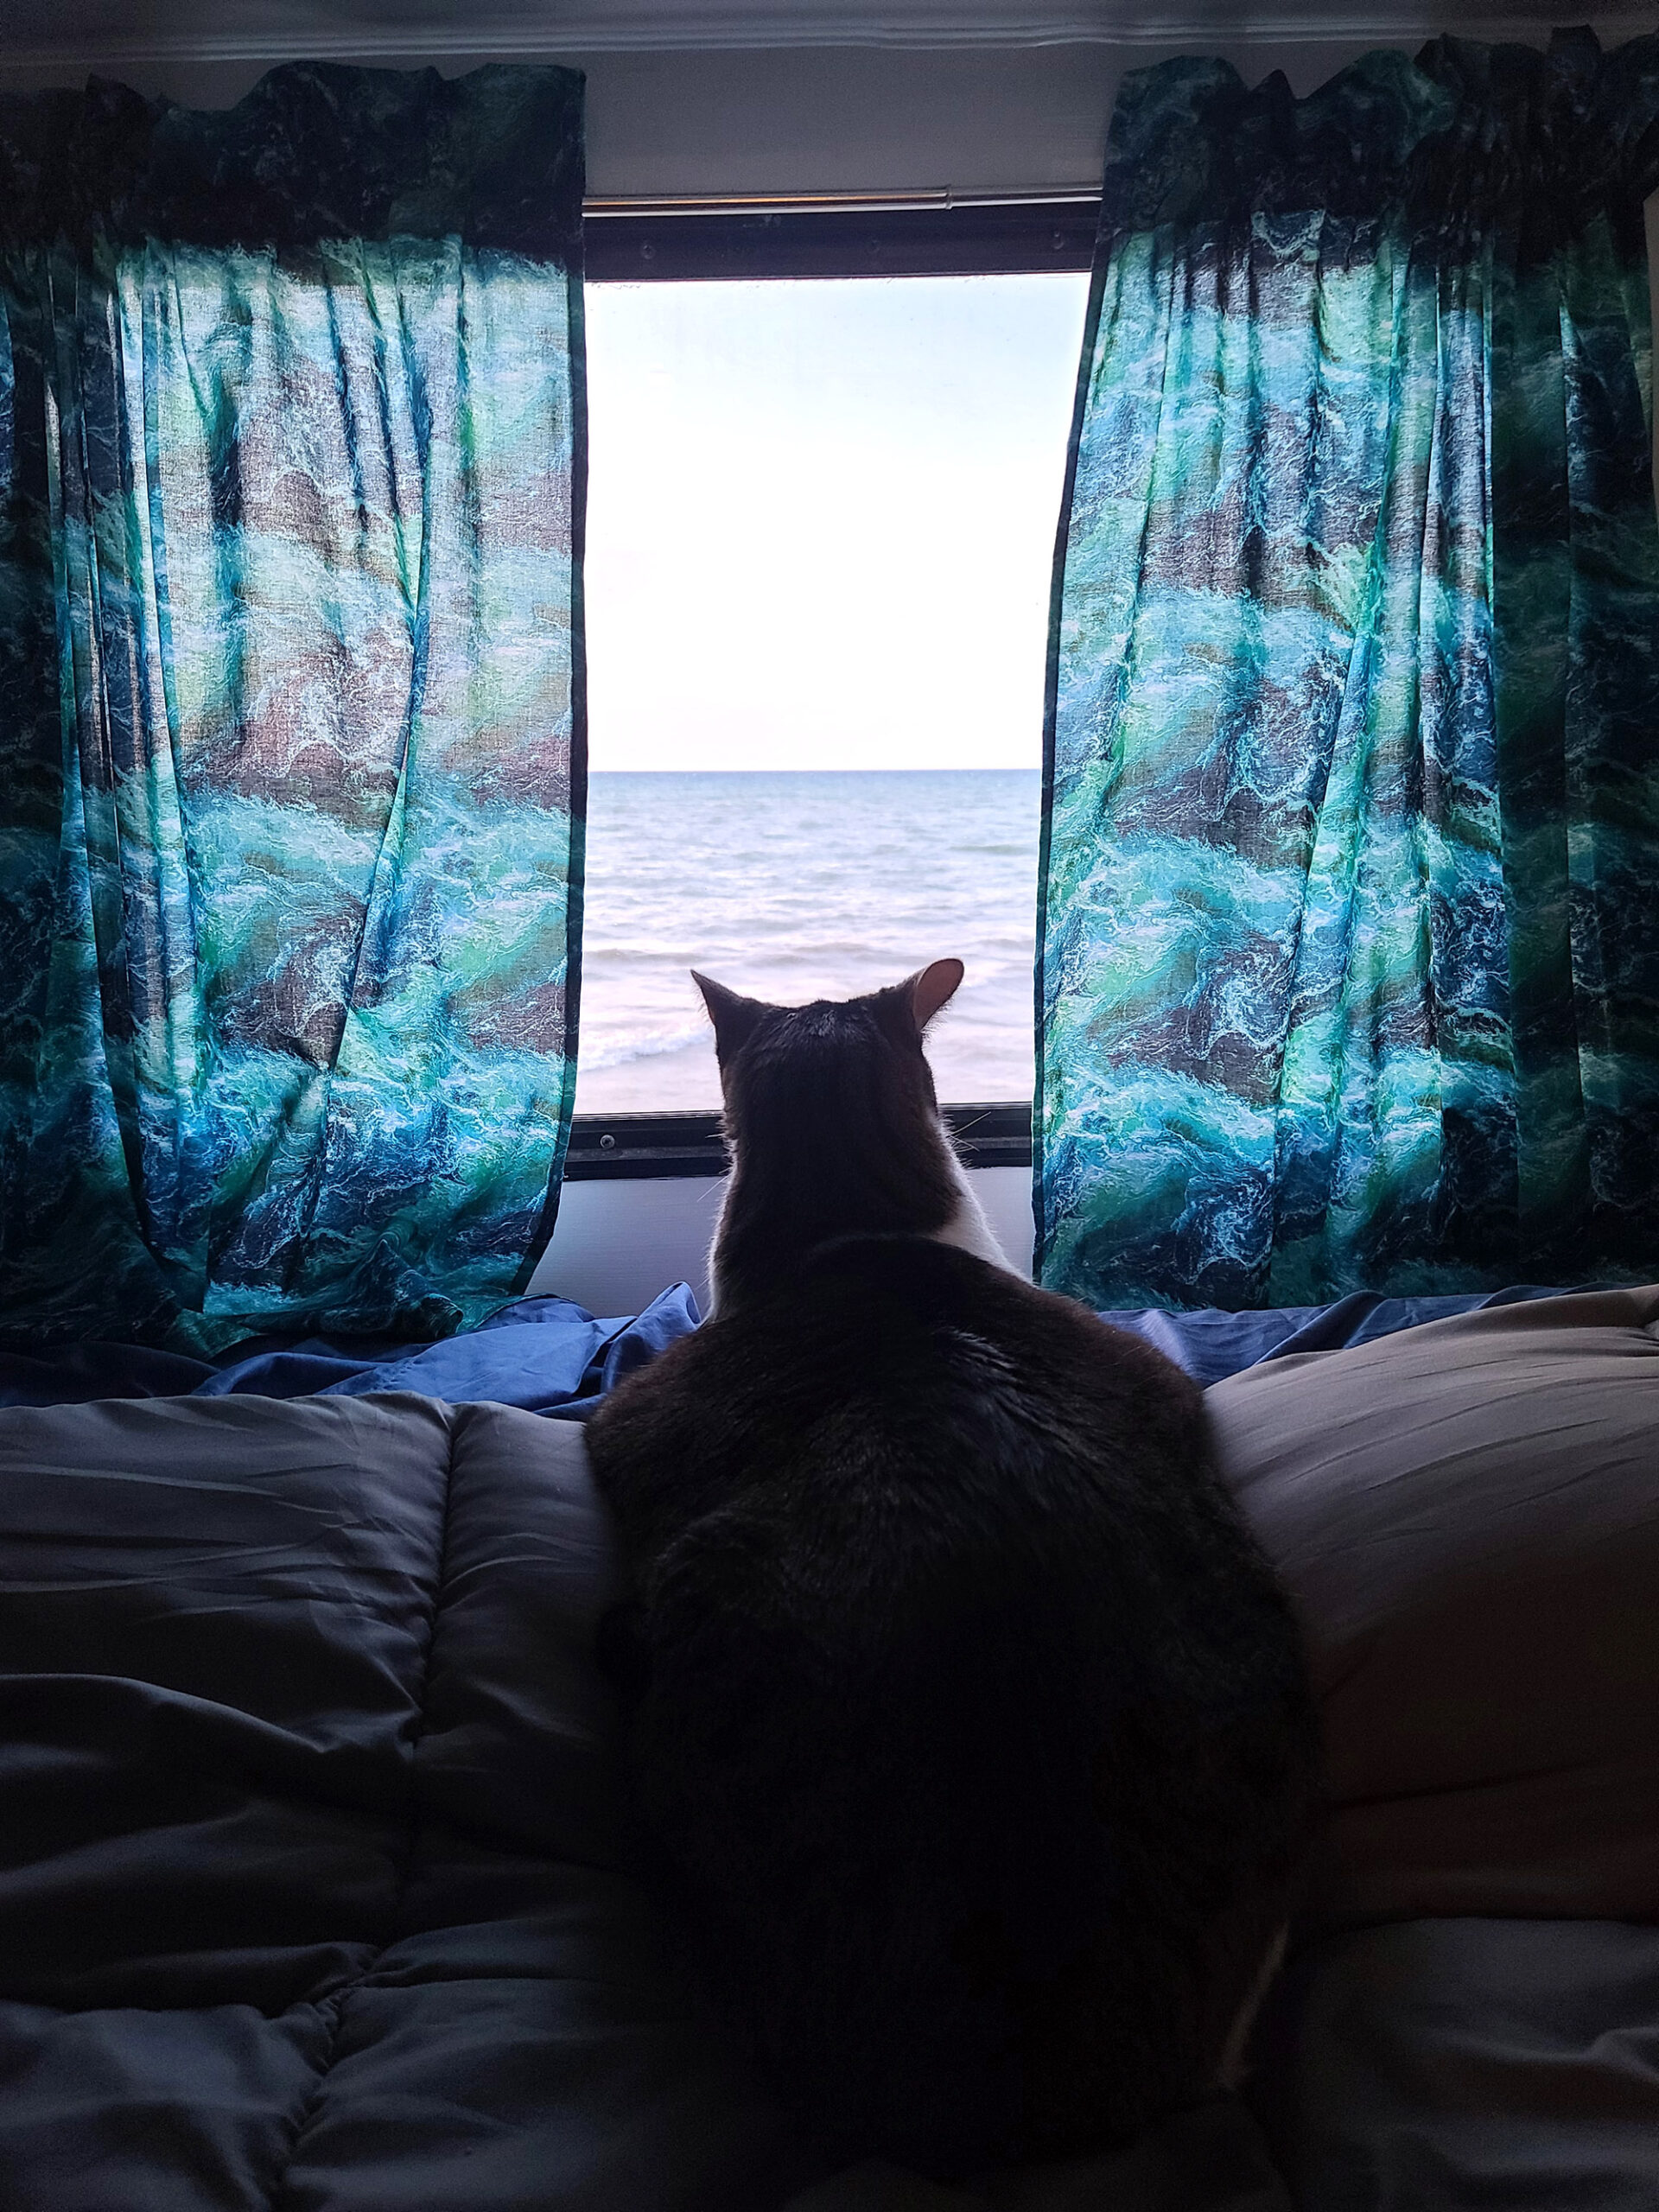 A large tabby cat on a bed, looking out the back window of an RV, over lake huron.